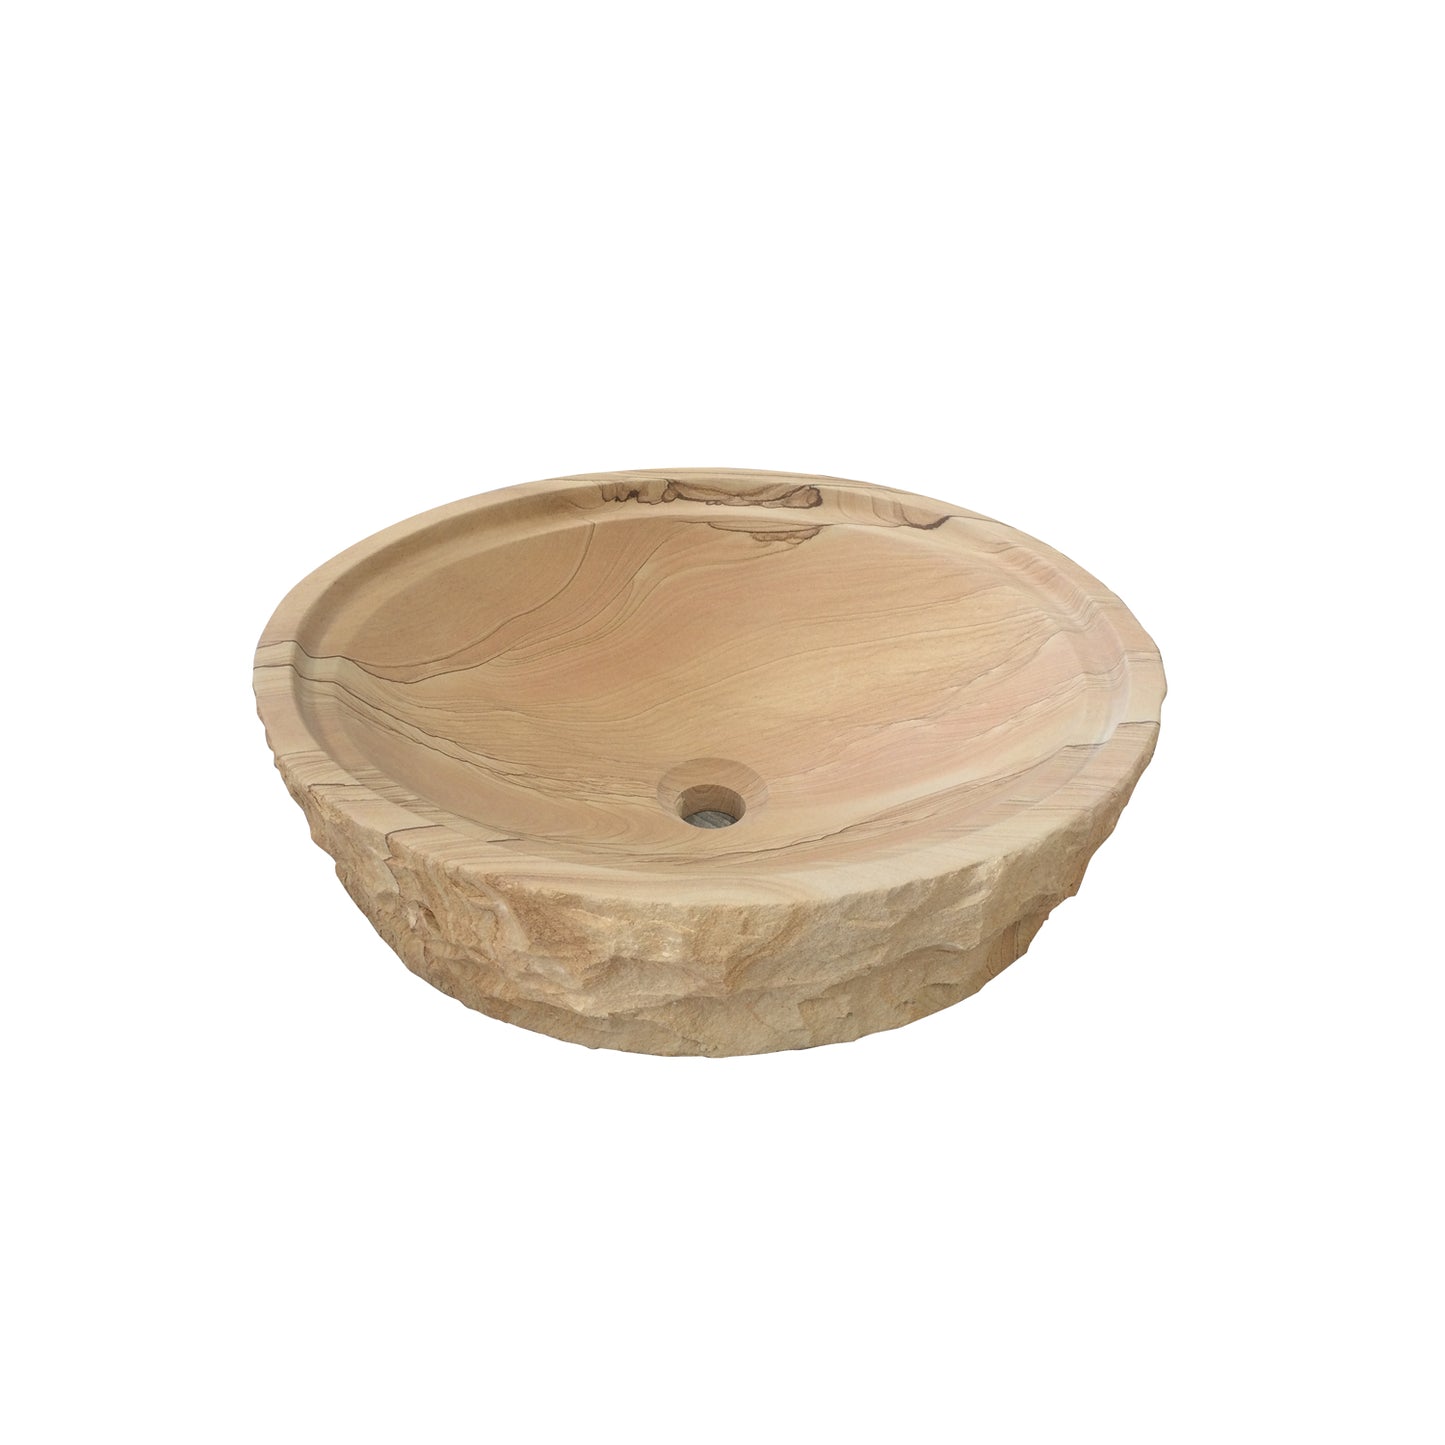 Mesquite Sandstone Vessel Sink 22" L x 15" Oval with Chiseled Finish